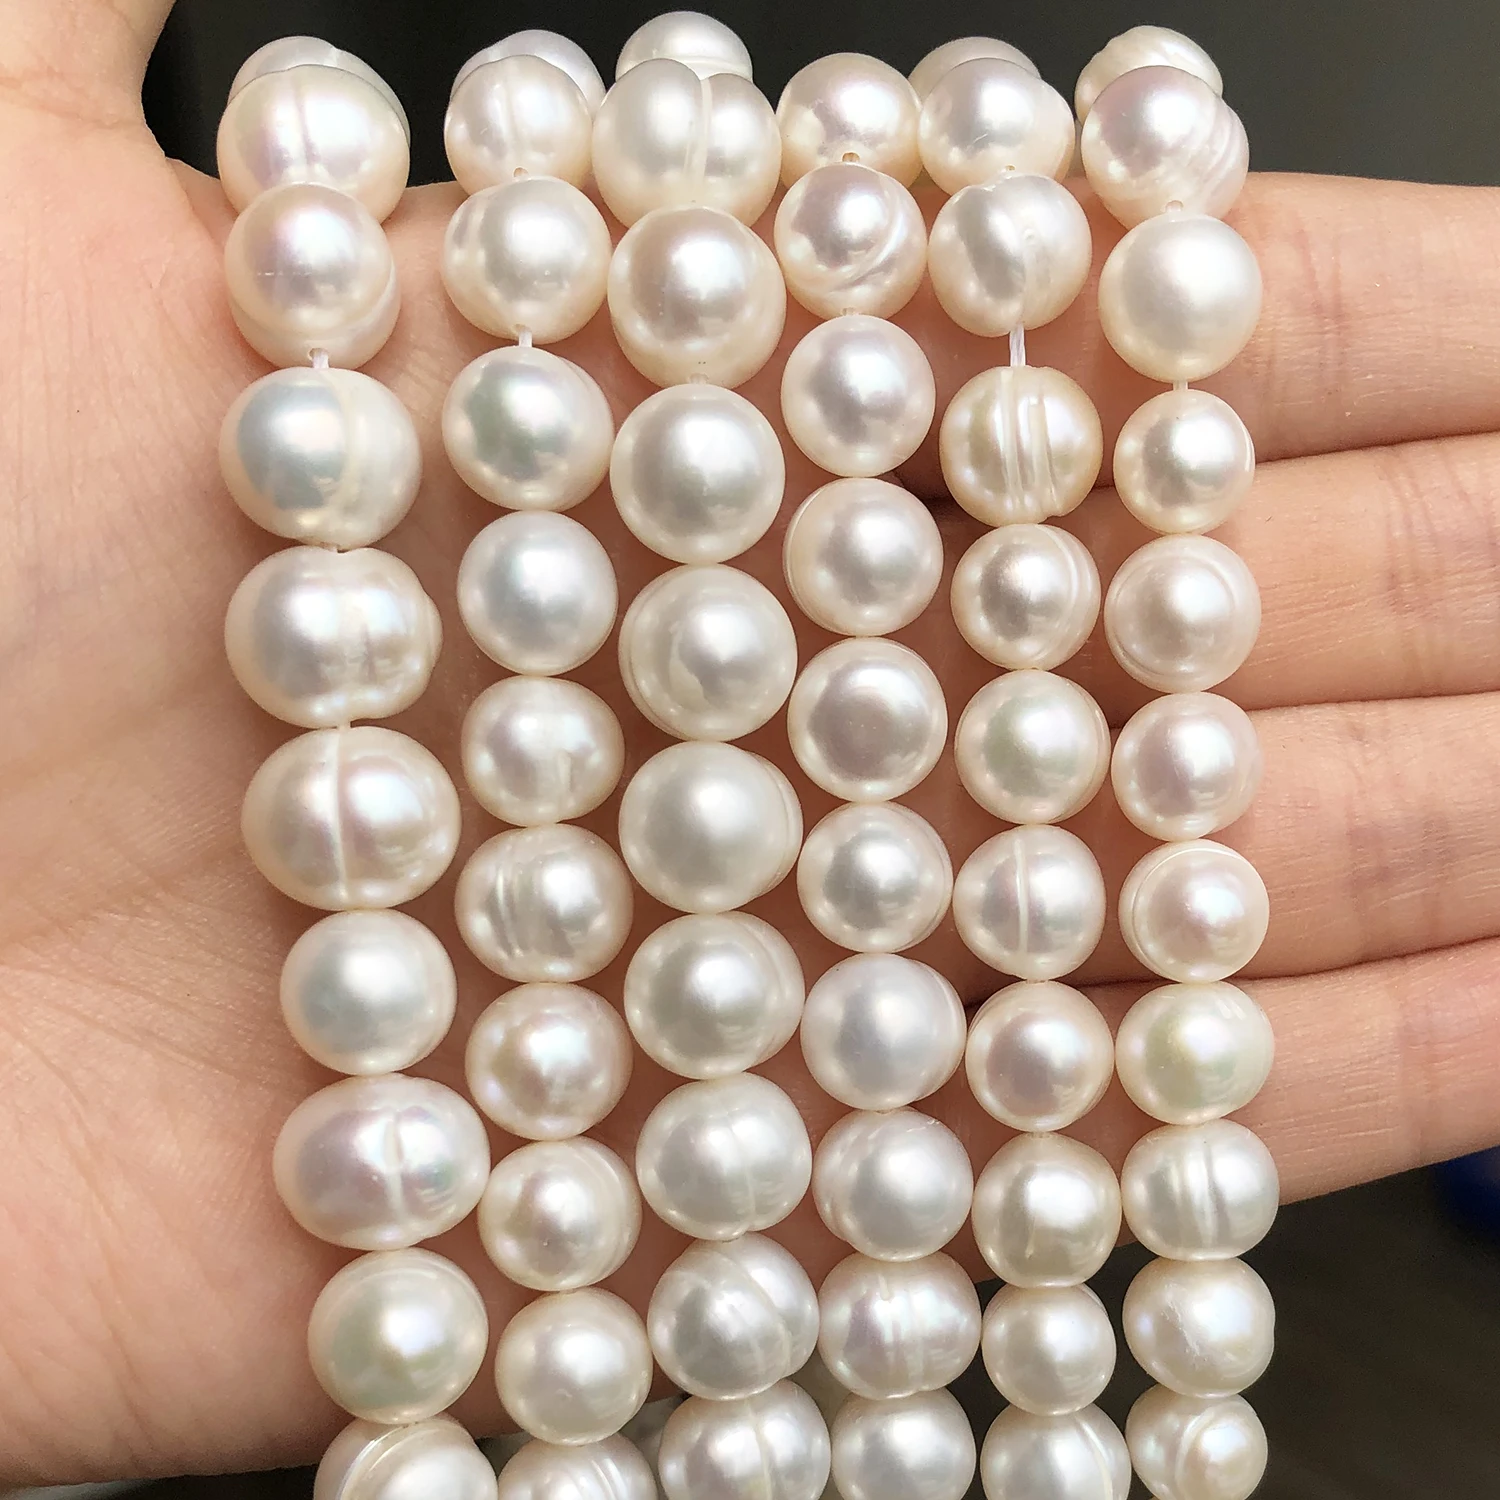 

Natural Freshwater Pearls 4 6 8 9mm Round Loose Spacer Beads for Jewelry Making DIY Charm Bracelet Necklace Accessories 15inch